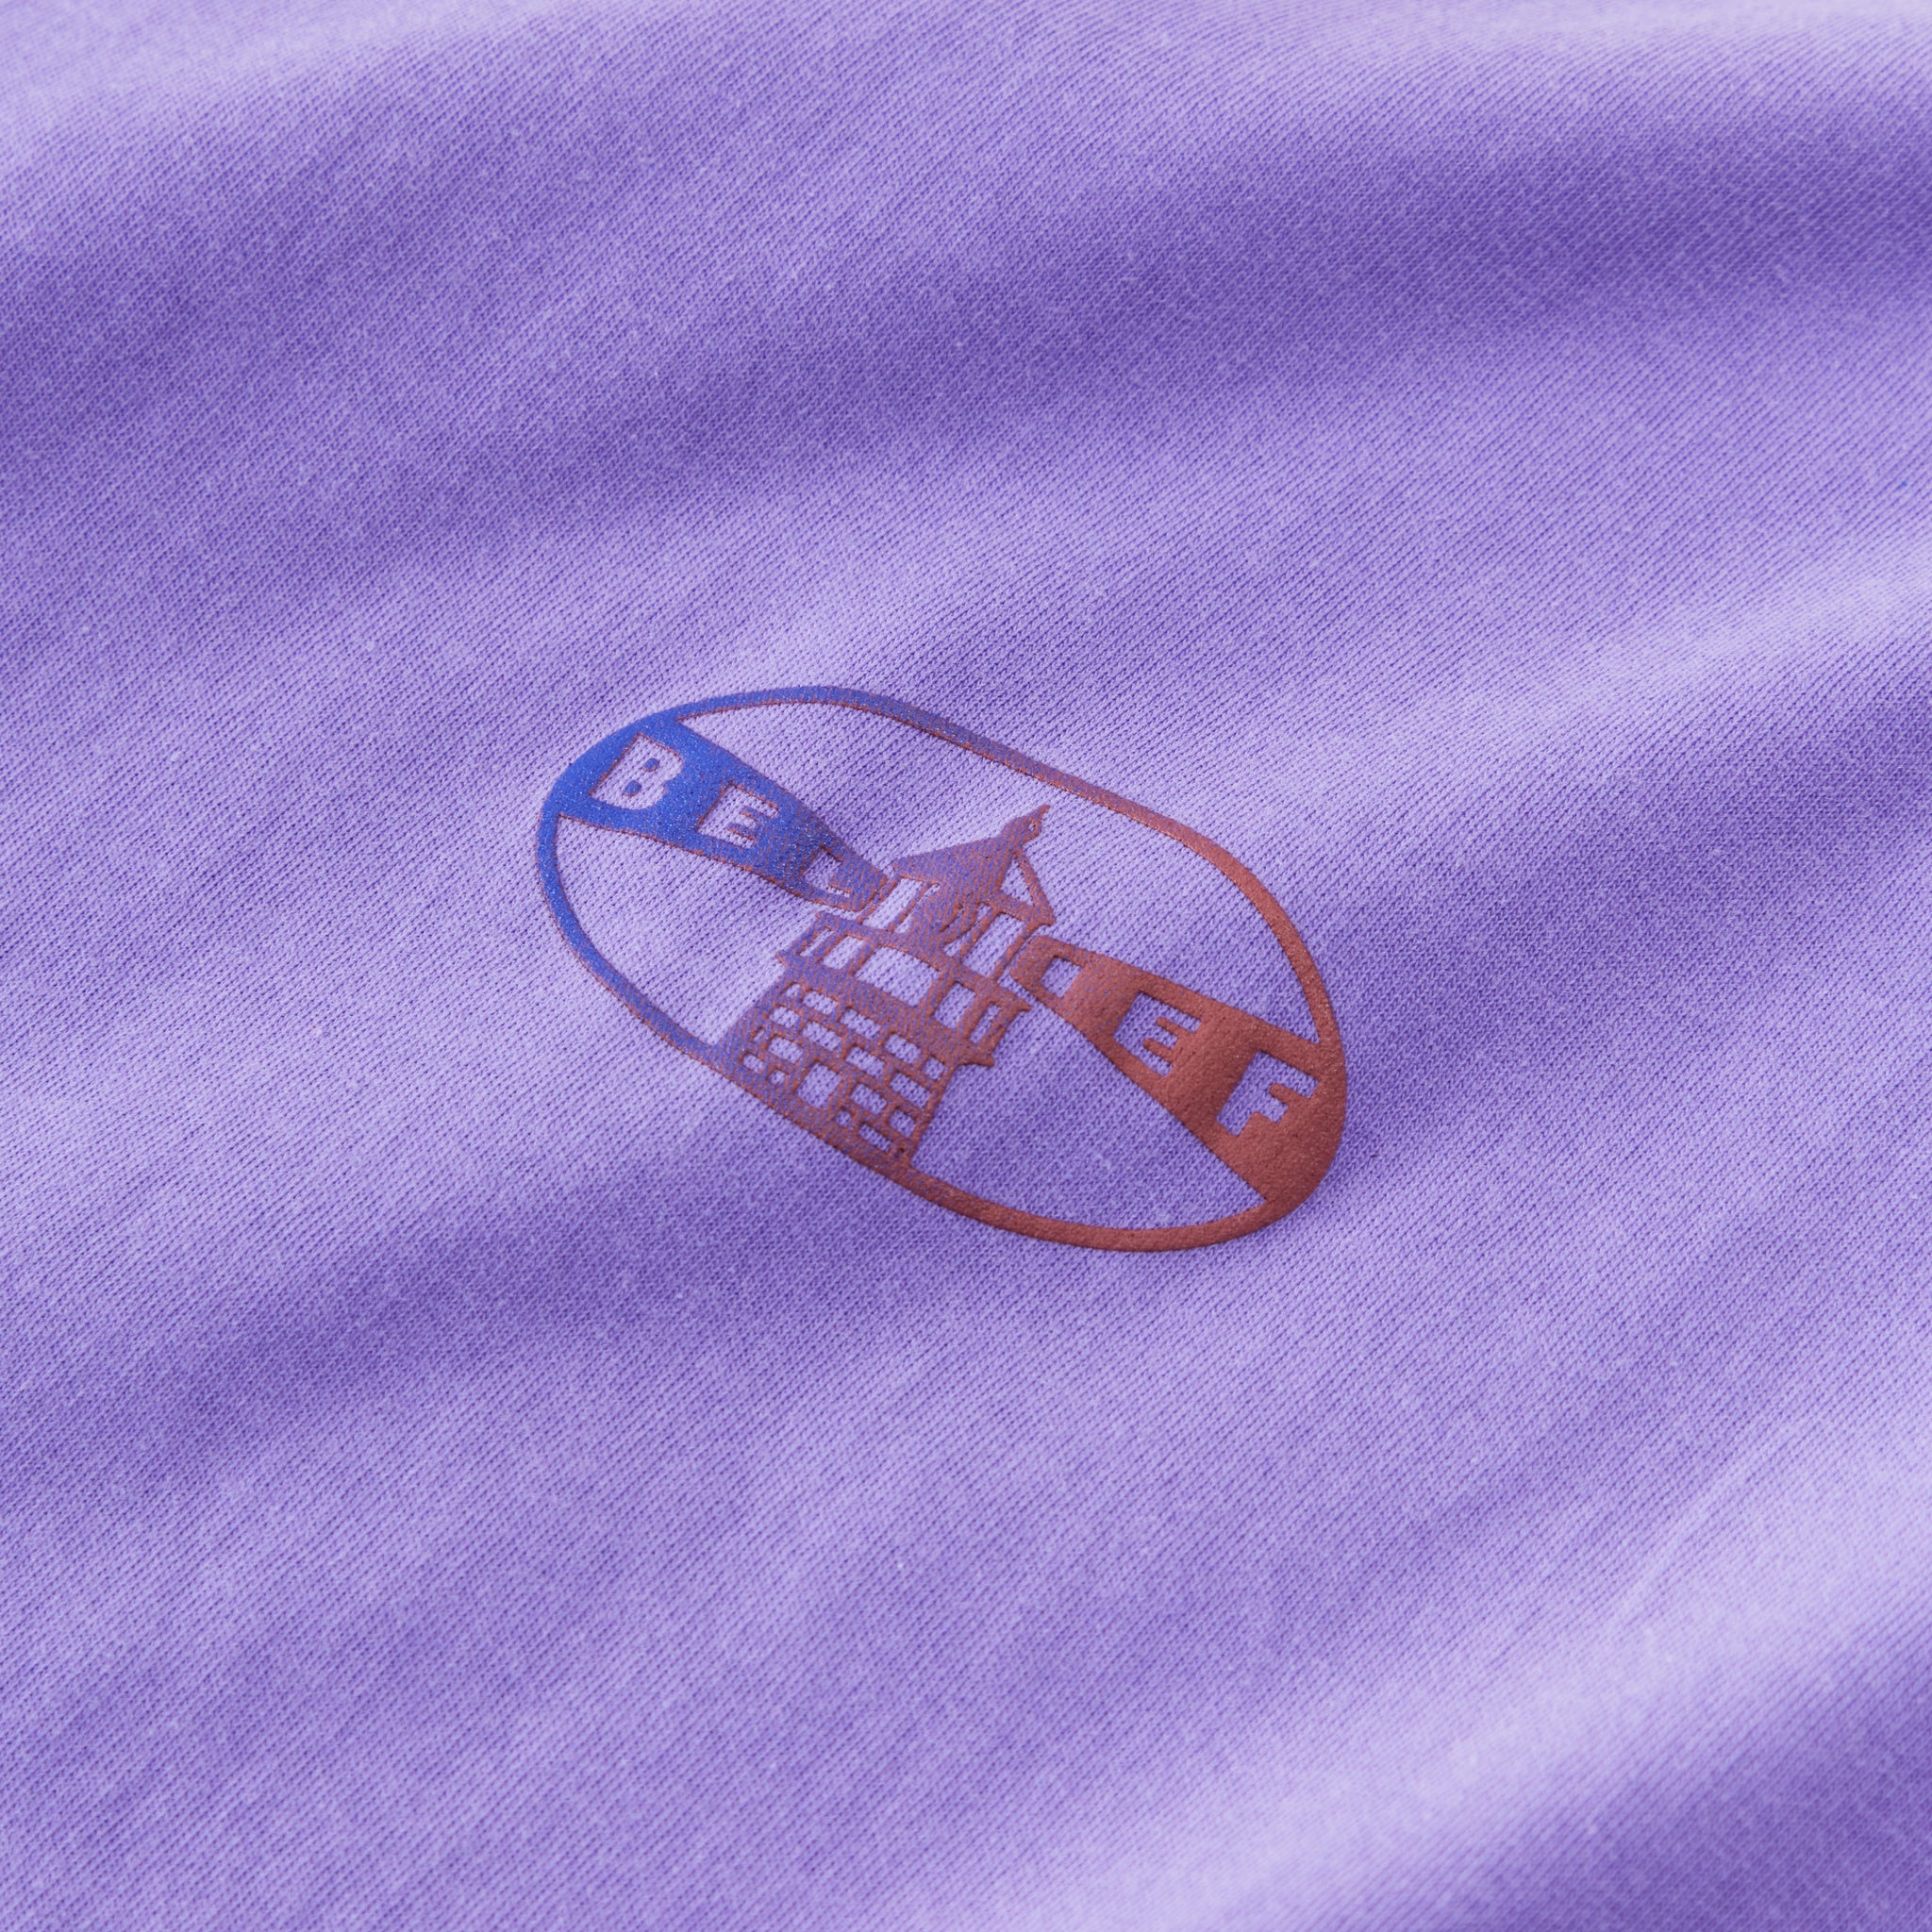 Lighthouse Tee - Violet